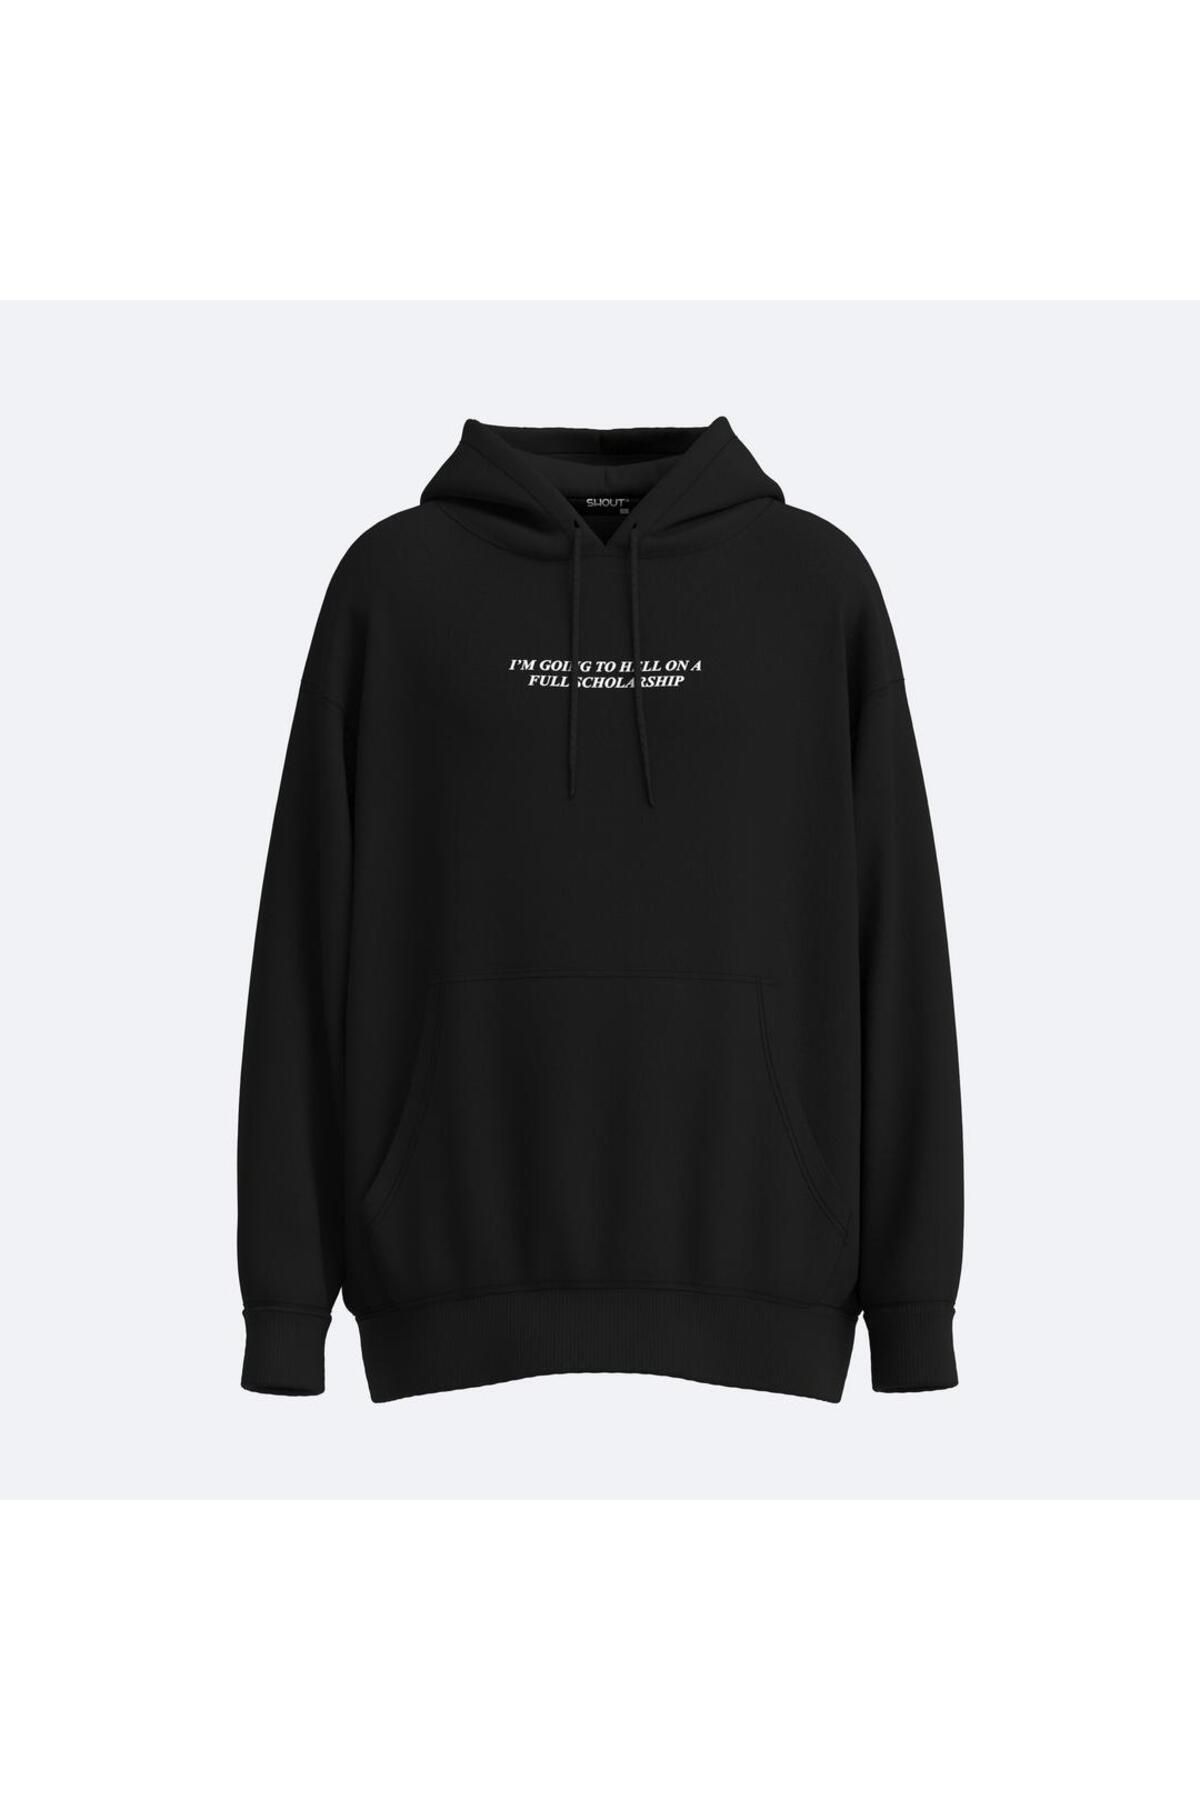 Shout Oversize I'm Going To Hell On A Full Scholarship Unisex Hoodie